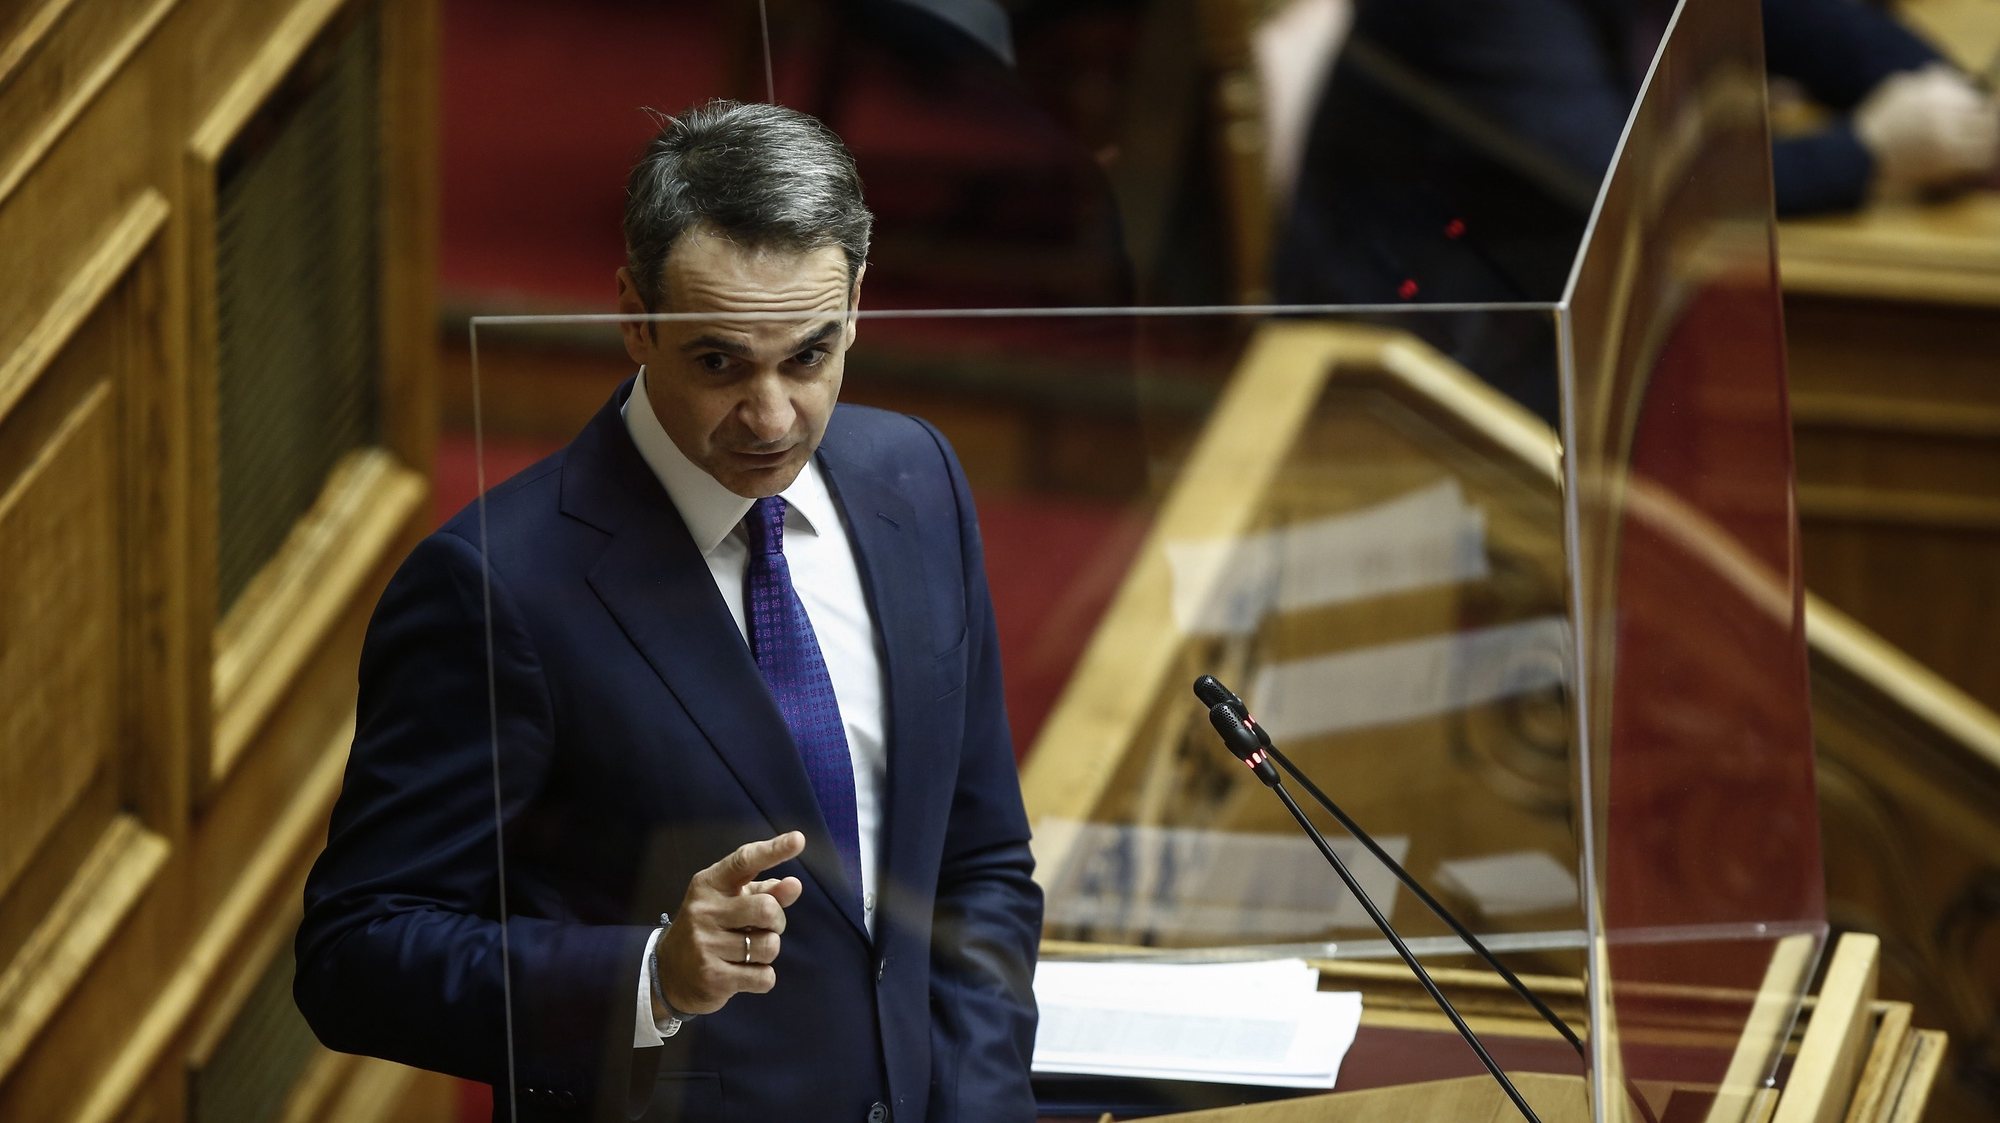 epa08885788 Greek Prime Minister Kyriakos Mitsotakis delivers his speech during a parliament session of a vote on 2021 budget in Athens, Greece, 15 December 2020. Greek lawmakers will be voting on the country&#039;s 2021 budget after midnight concluding a five-day debate in parliament. The debate will end with an address by Prime Minister Kyriakos Mitsotakis, which will follow the speeches of the opposition party leaders.  EPA/YANNIS KOLESIDIS